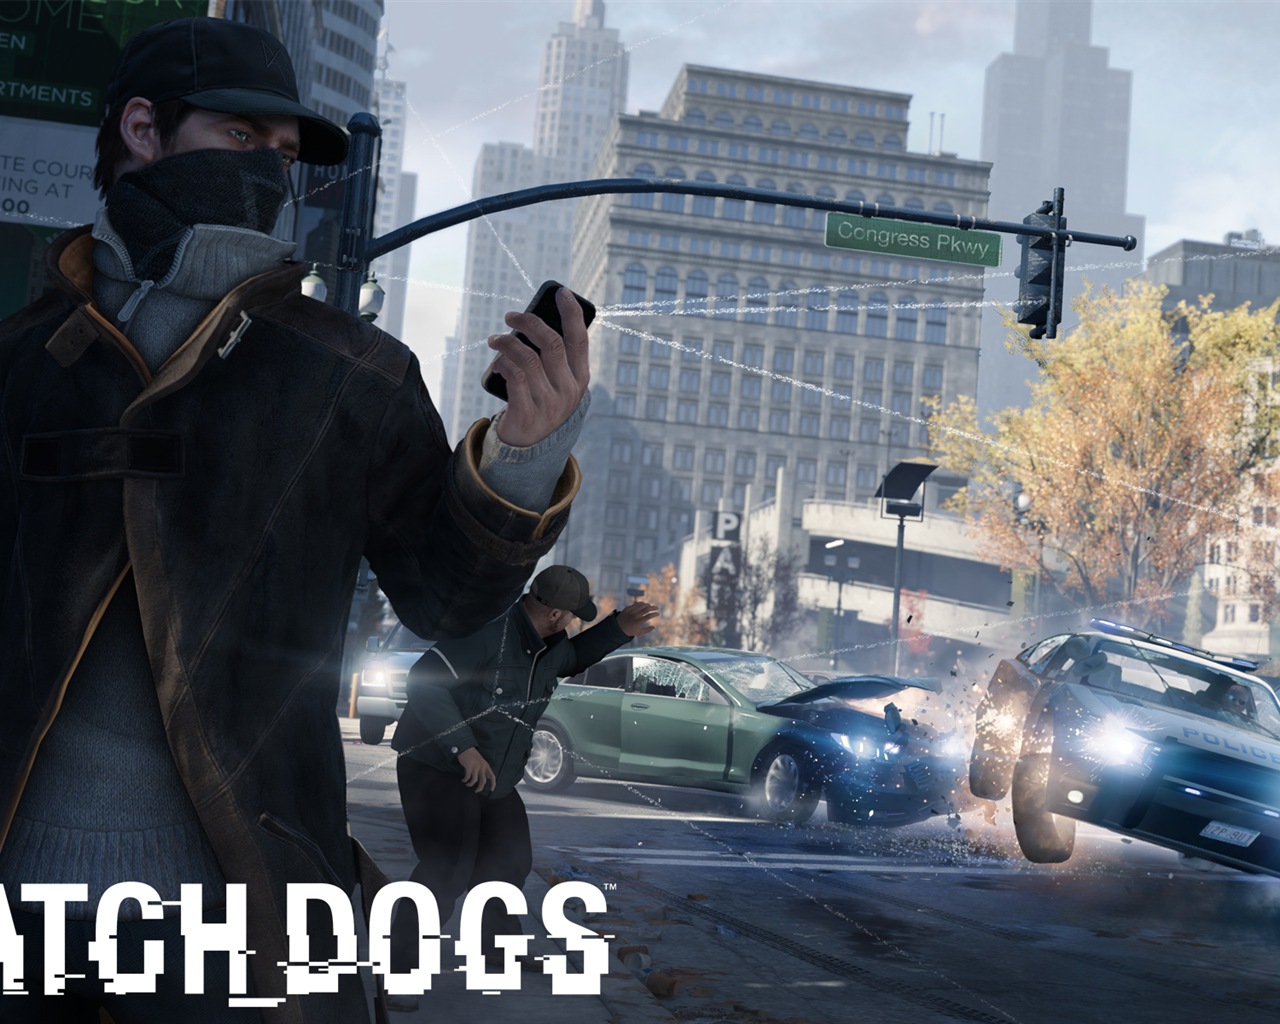 Watch Dogs 2013 game HD wallpapers #4 - 1280x1024